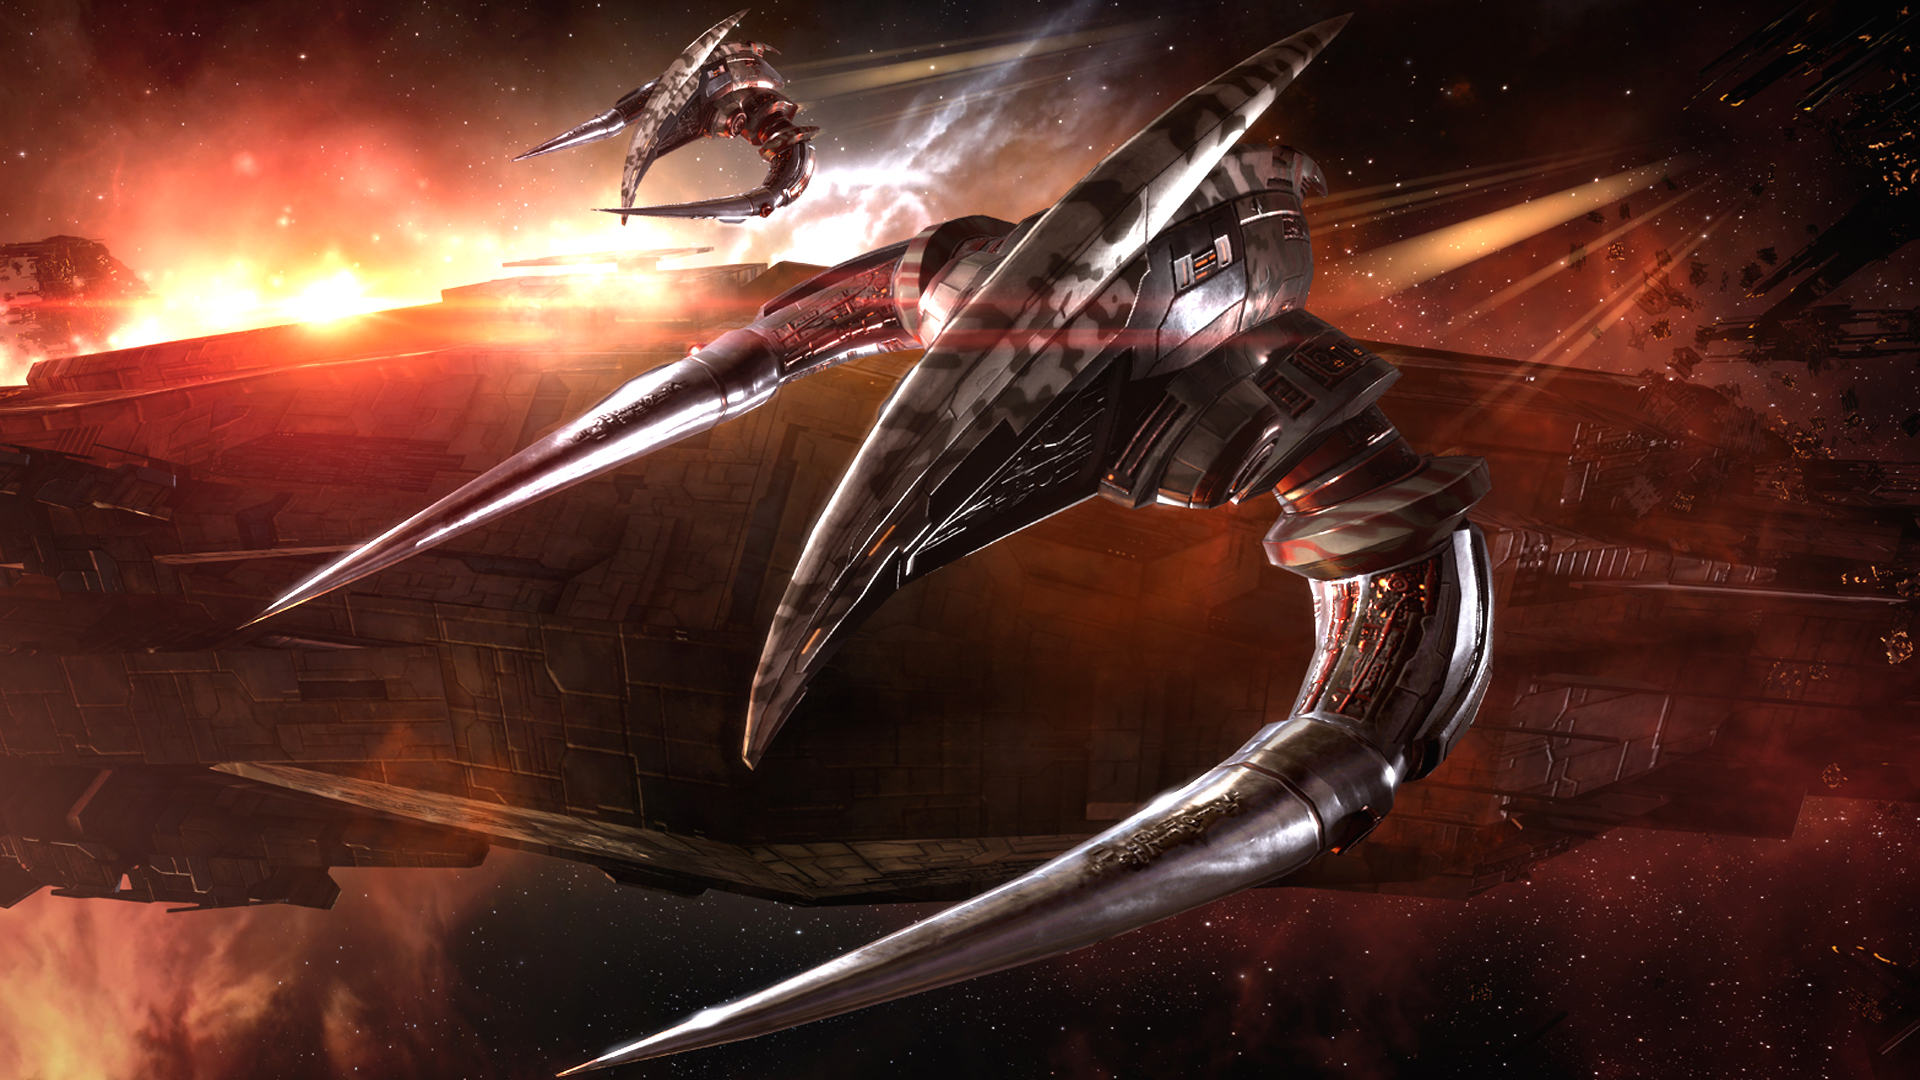 Eve Online subscriptions are going up due to 